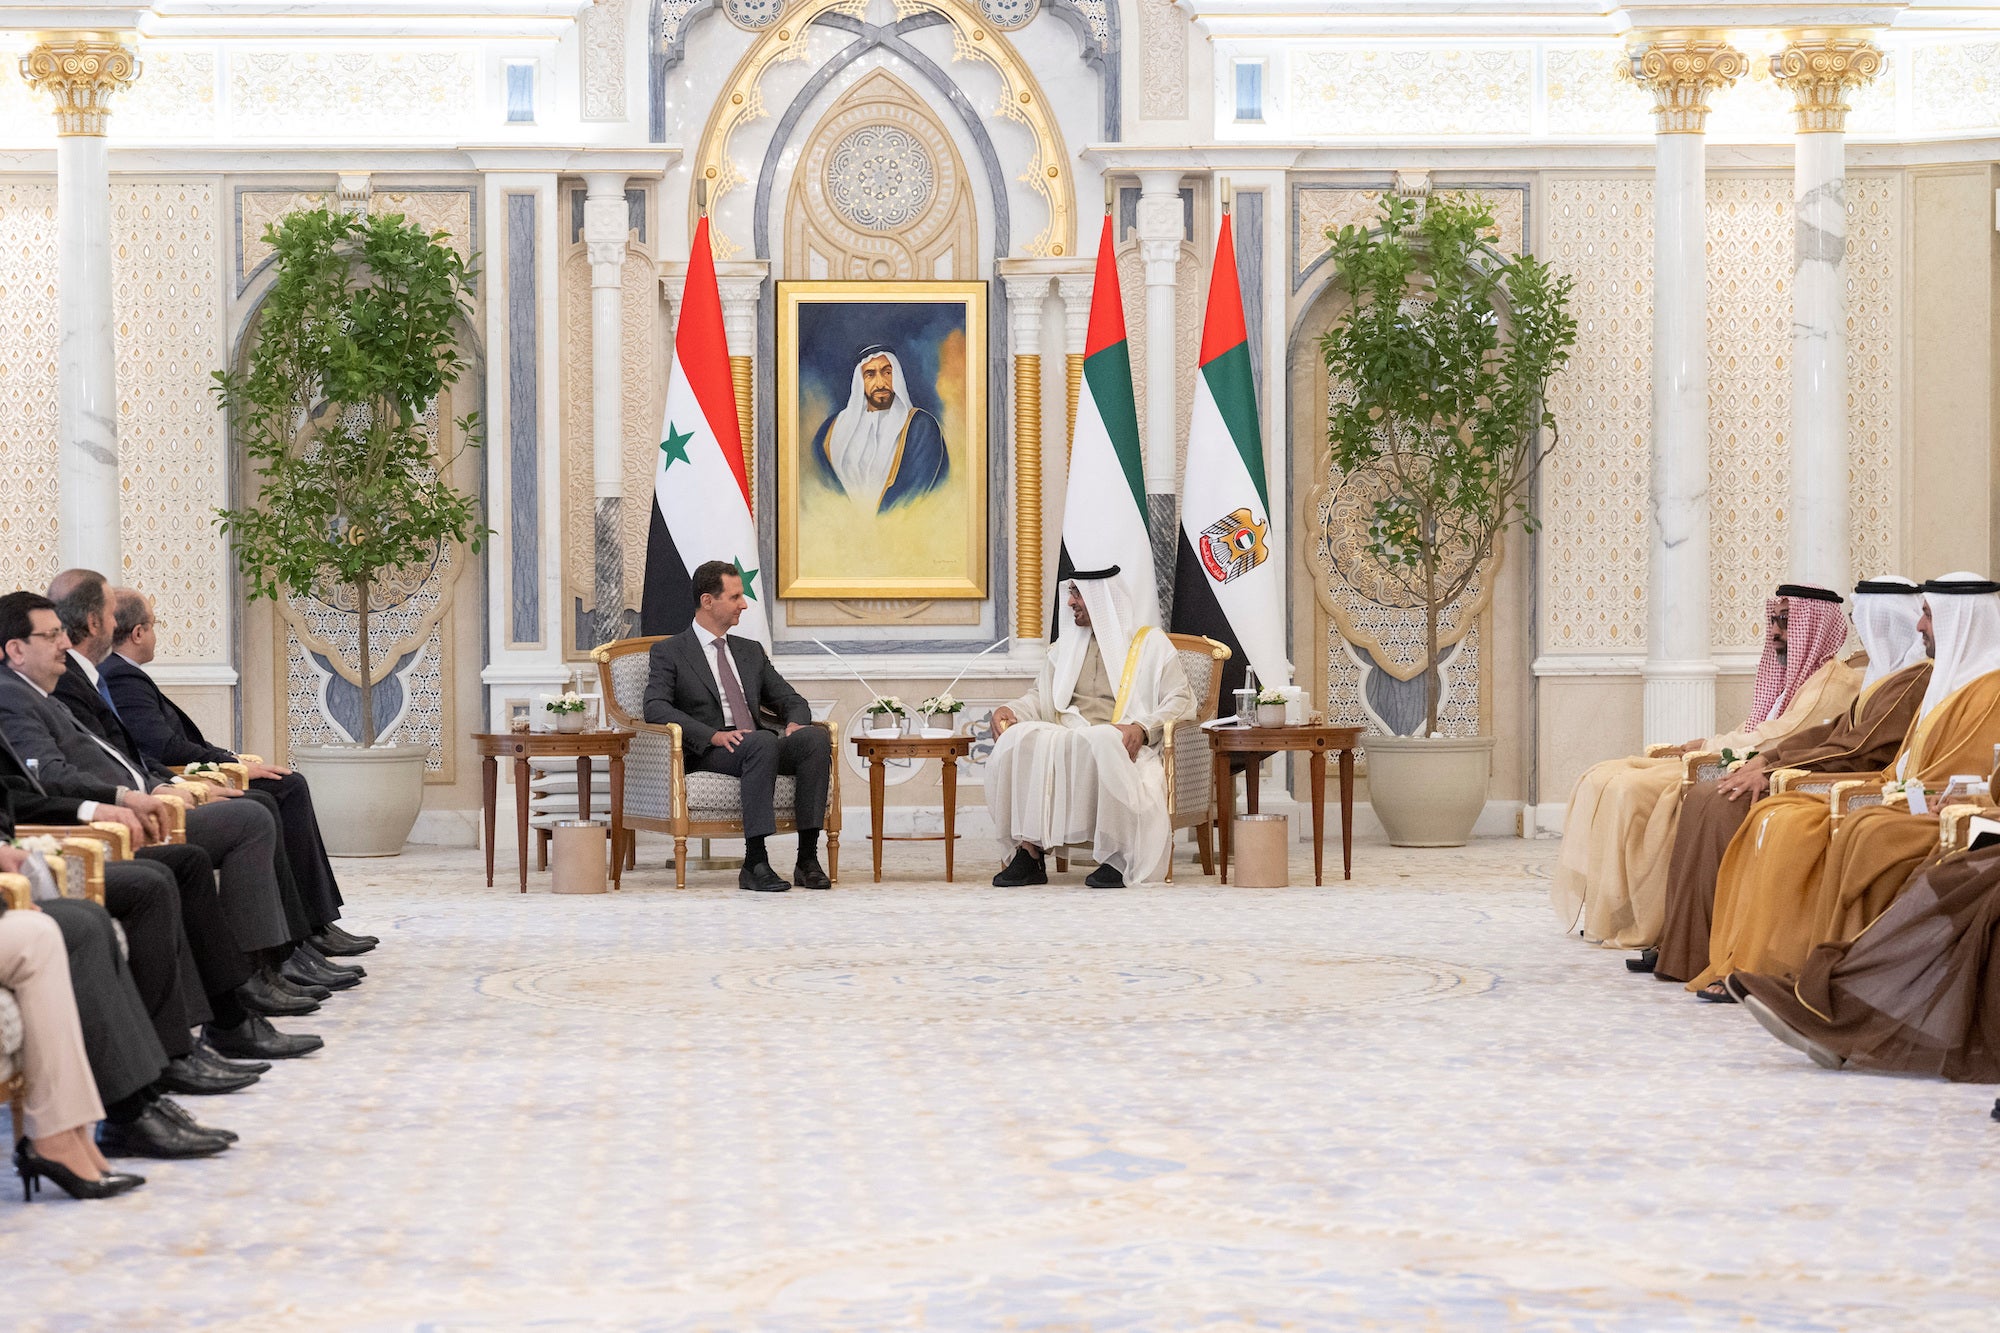 Sheikh Mohamed bin Zayed Al Nahyan, President of the United Arab Emirates meets with Bashar Al Assad, President of Syria during a reception at Qasr Al Watan in Abu Dhabi, United Arab Emirates.